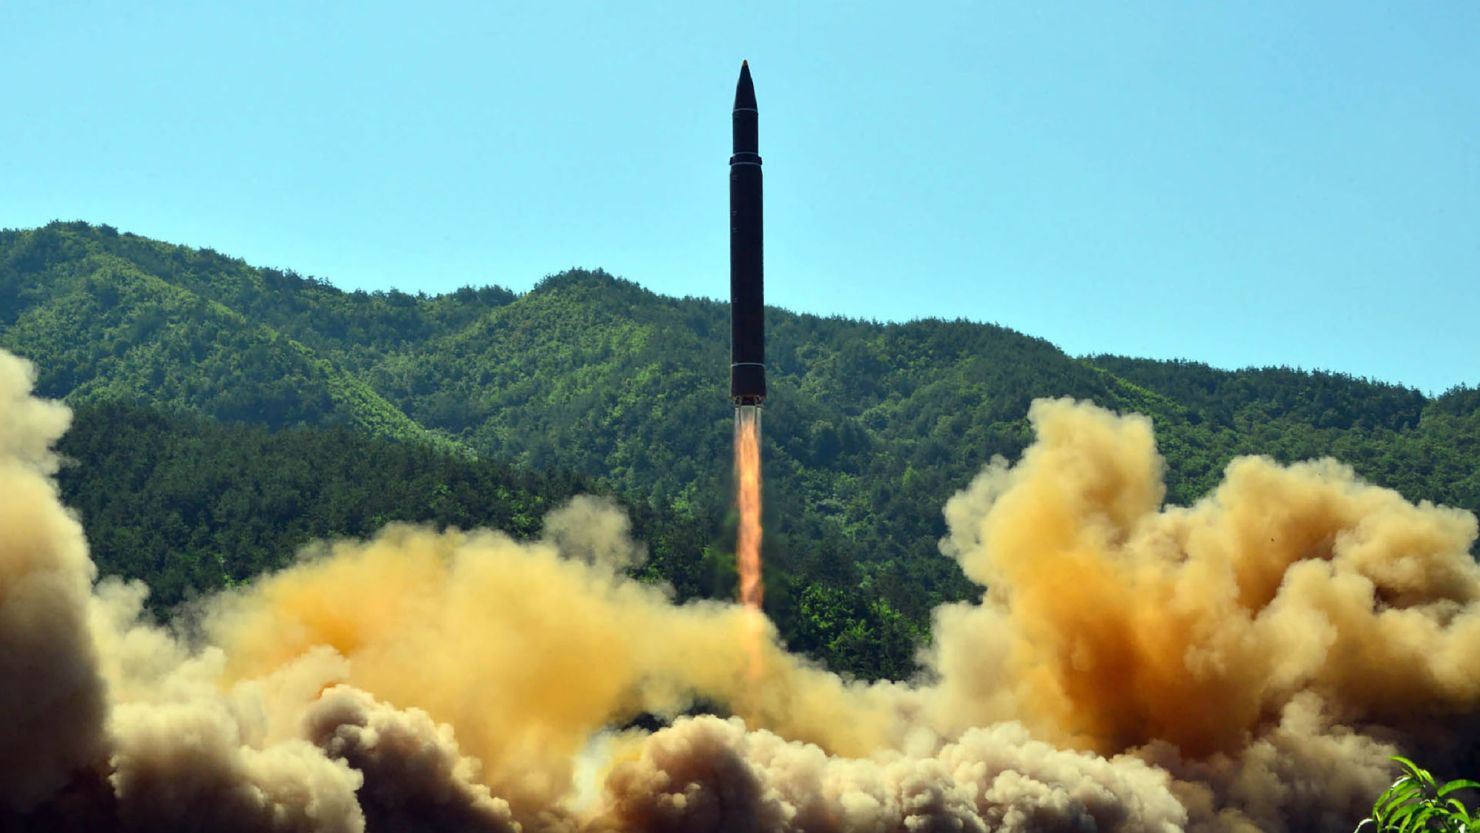 This picture released by North Korea's state media on July 5 shows the successful test-fire of the intercontinental ballistic missile Hwasong-14 at an undisclosed location. (STR/AFP/Getty Images)